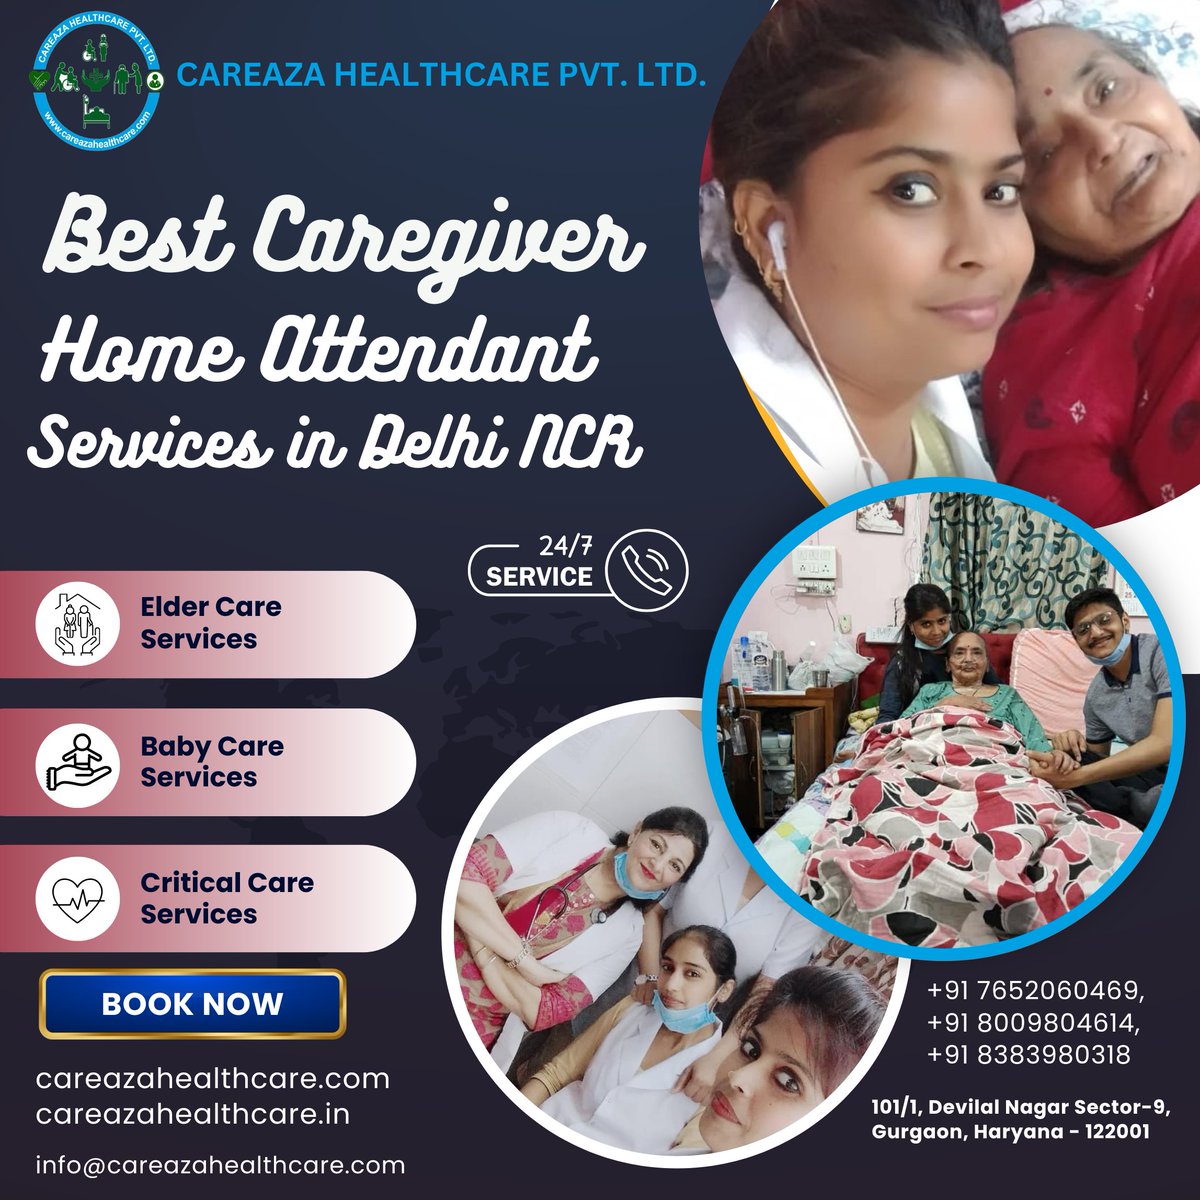 If you are looking for Home Attendant Service Near You, so should have to connect with Careaza Healthcare first. 
#HomeHealthcare, #nursingservices, #nursingbureau, #homecare, #Baby, #BabyCare,  #HomeCare, #Healthcare, #NursingCare, #ElderCare, #CriticalCare, #CareazaHealthcare